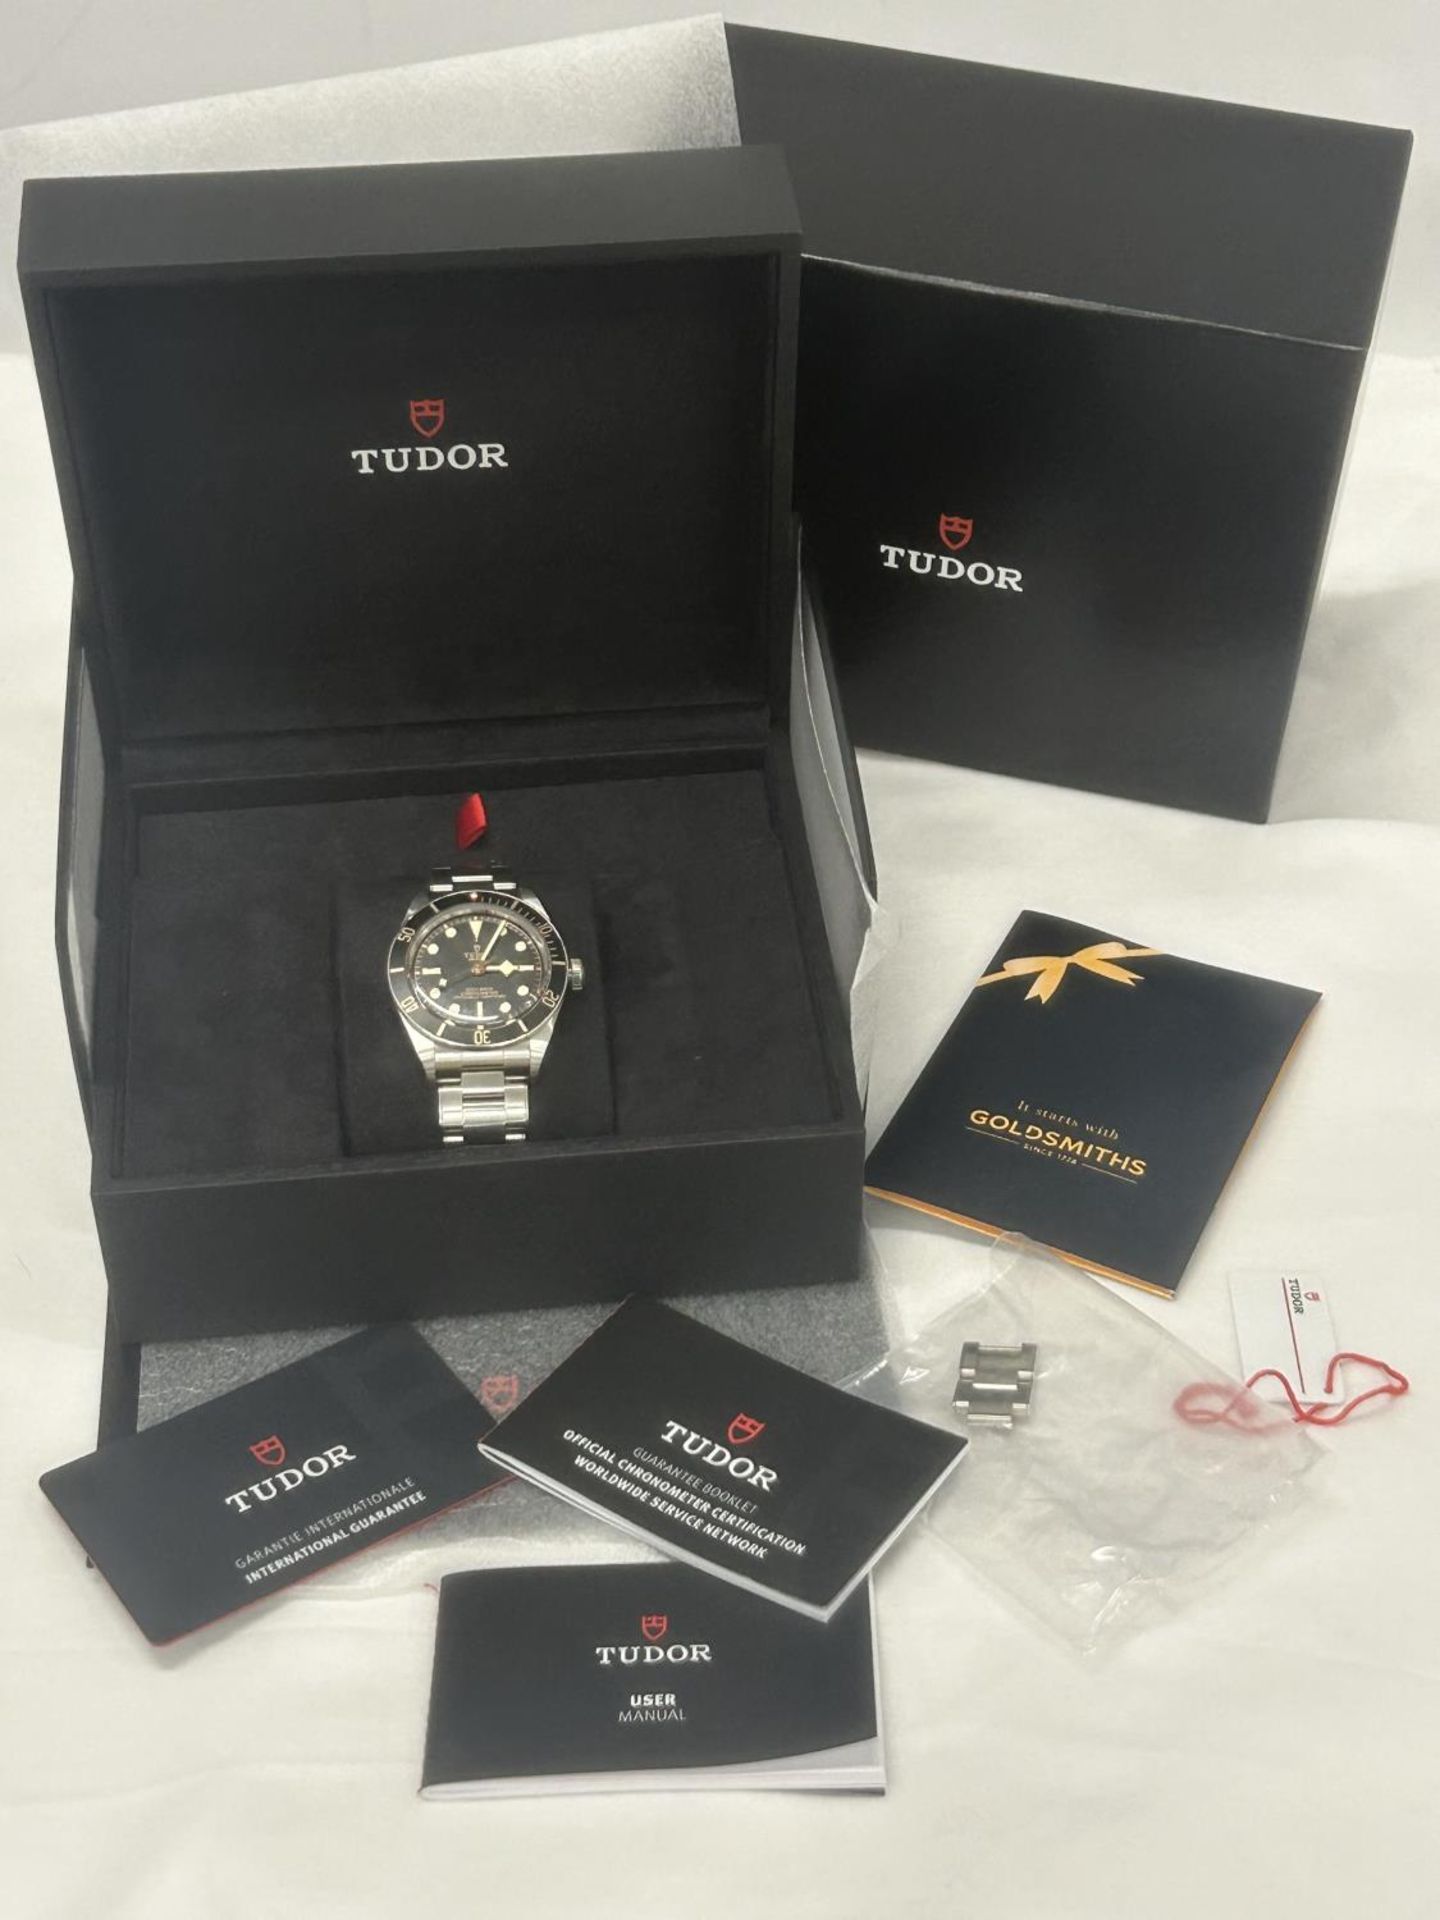 A TUDOR BLACK BAY 58 CHRONOGRAPH AUTOMATIC WATCH WITH 39MM BLACK DIAL, COMPLETE WITH ORIGINAL BOX